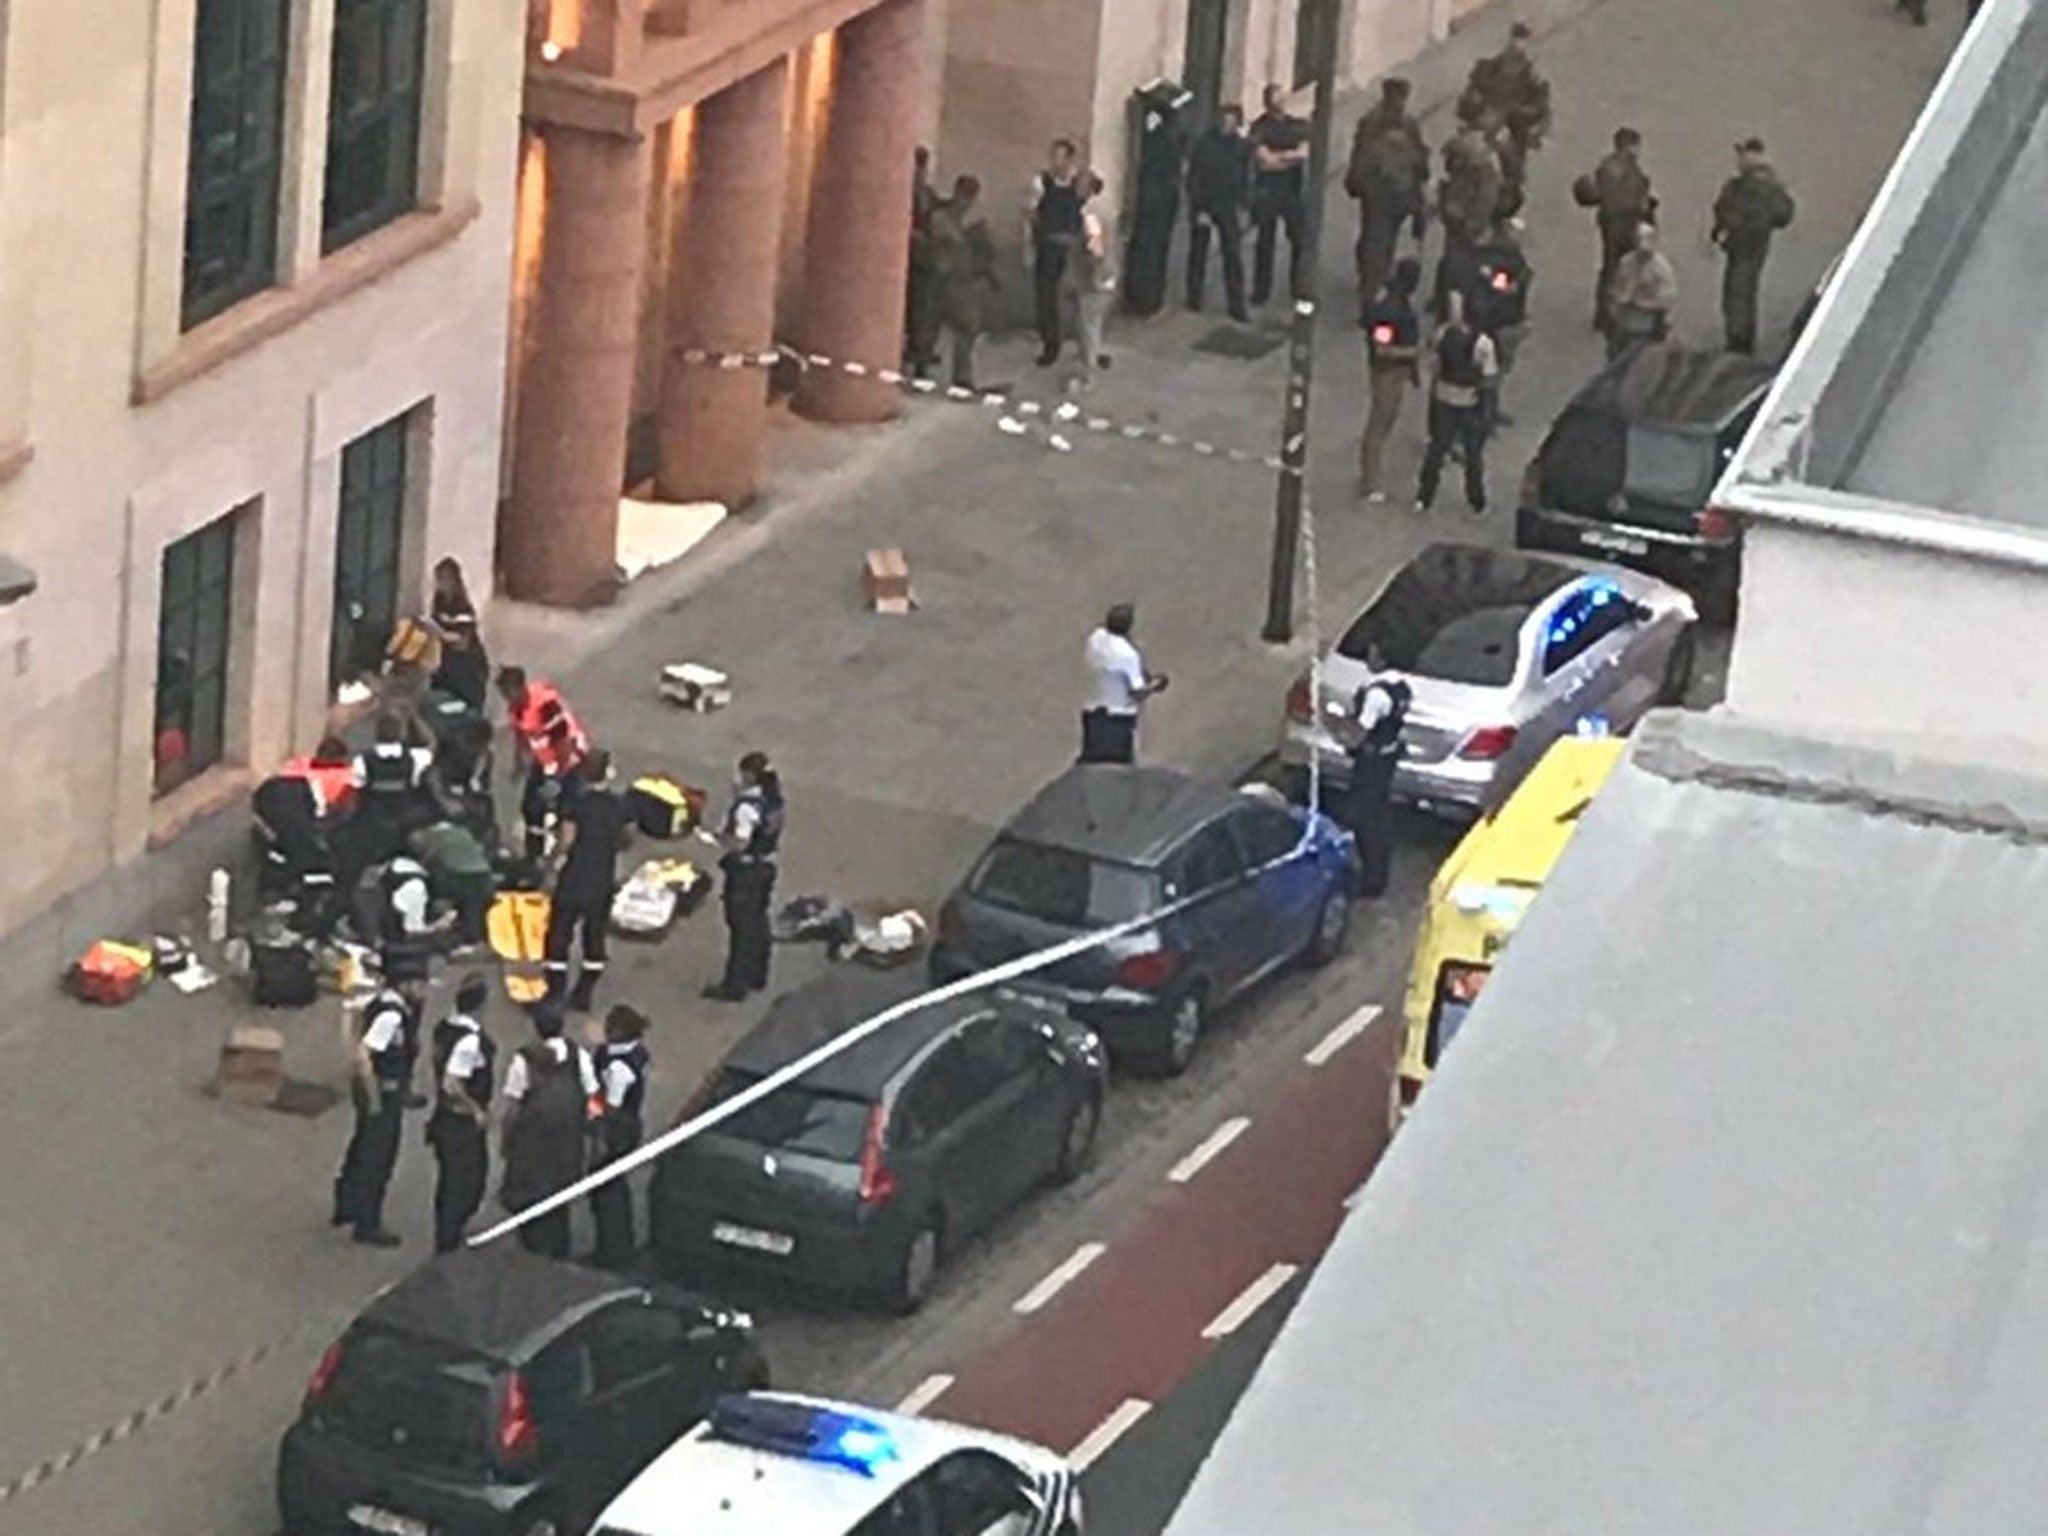 Belgian police and soldiers at the scene where a man attacked soldiers with a knife in Brussels on 25 August